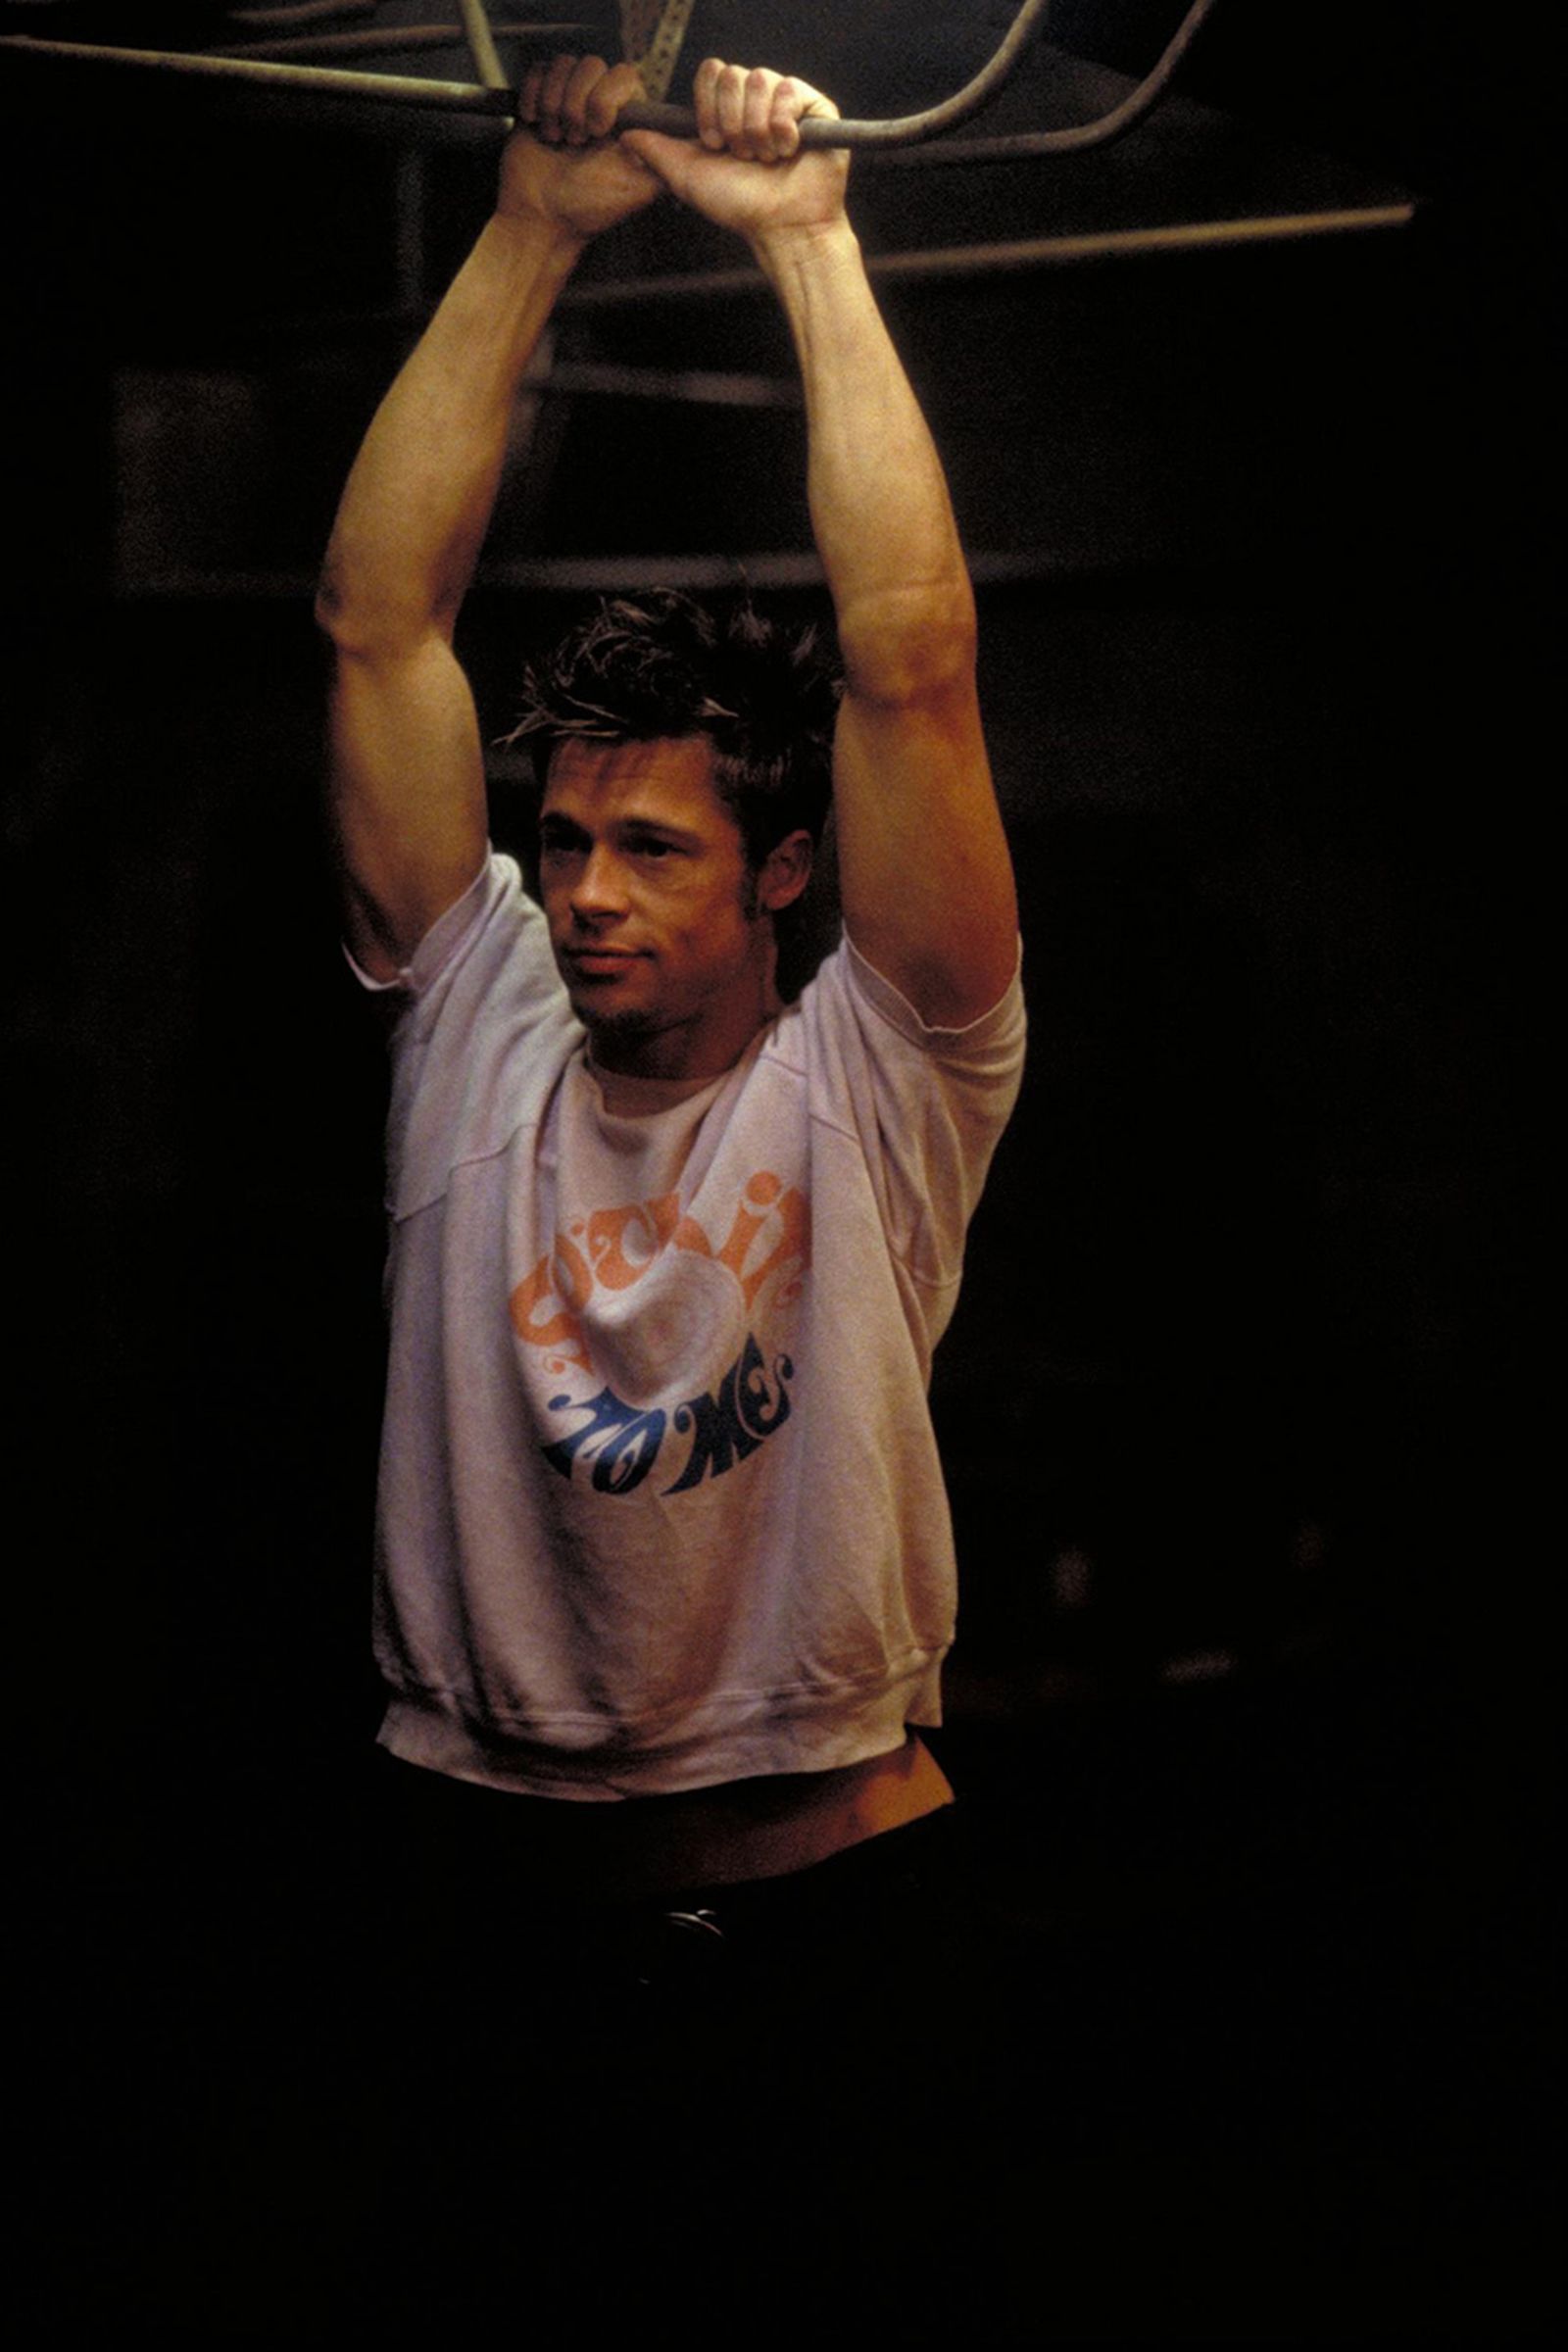 Brad Pitt 'Fight Club' Body: Here Are His Workout & Diet Tips